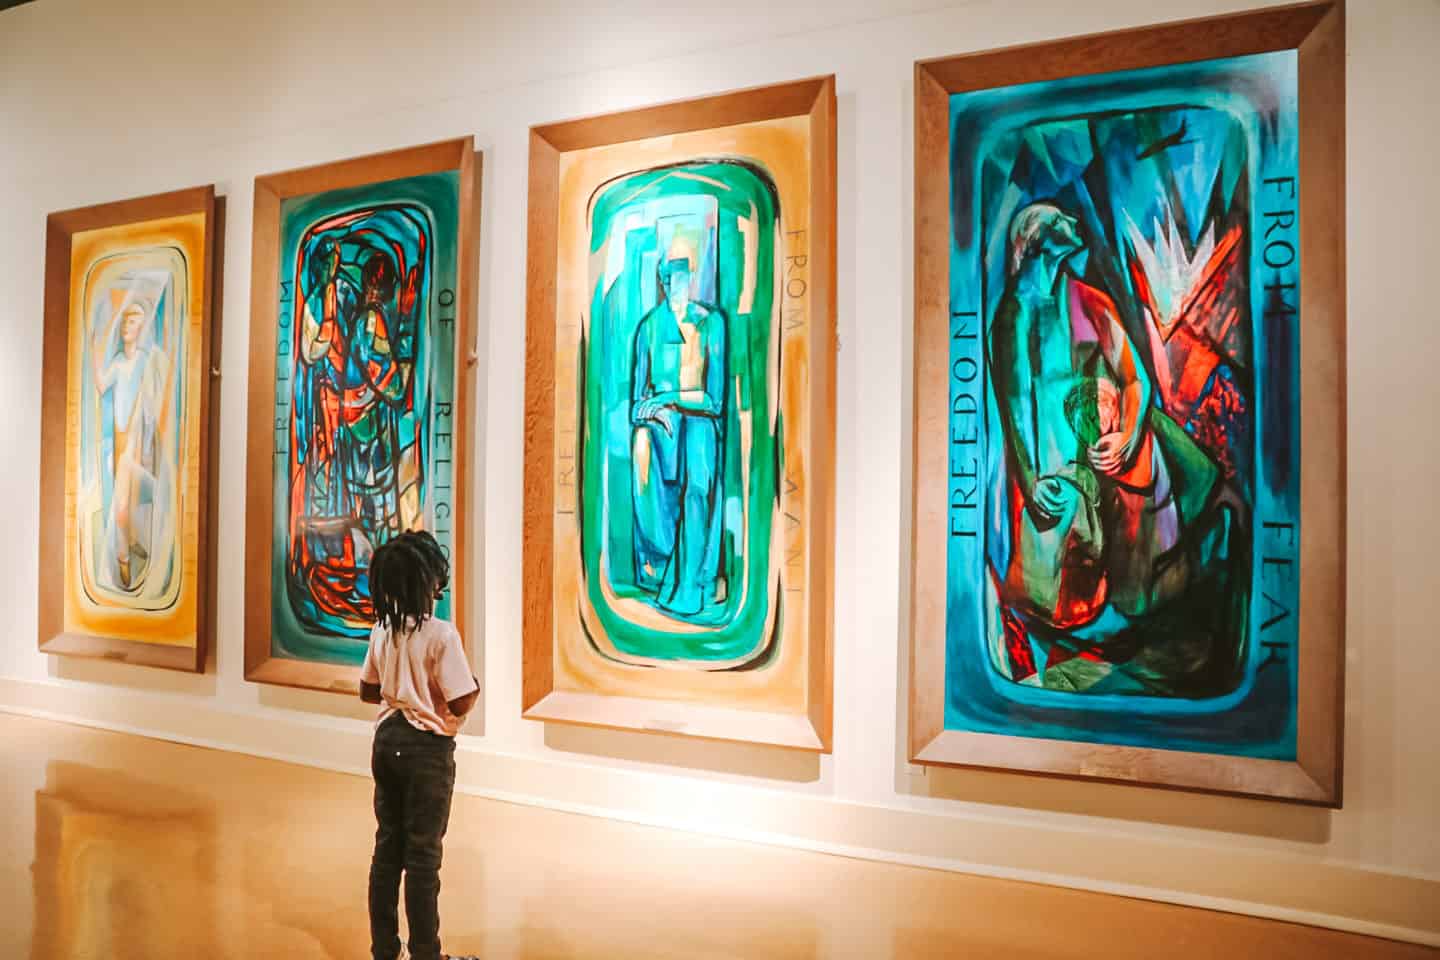 Museum of Art | Fun Things To Do In Jackson Mississippi with Kids